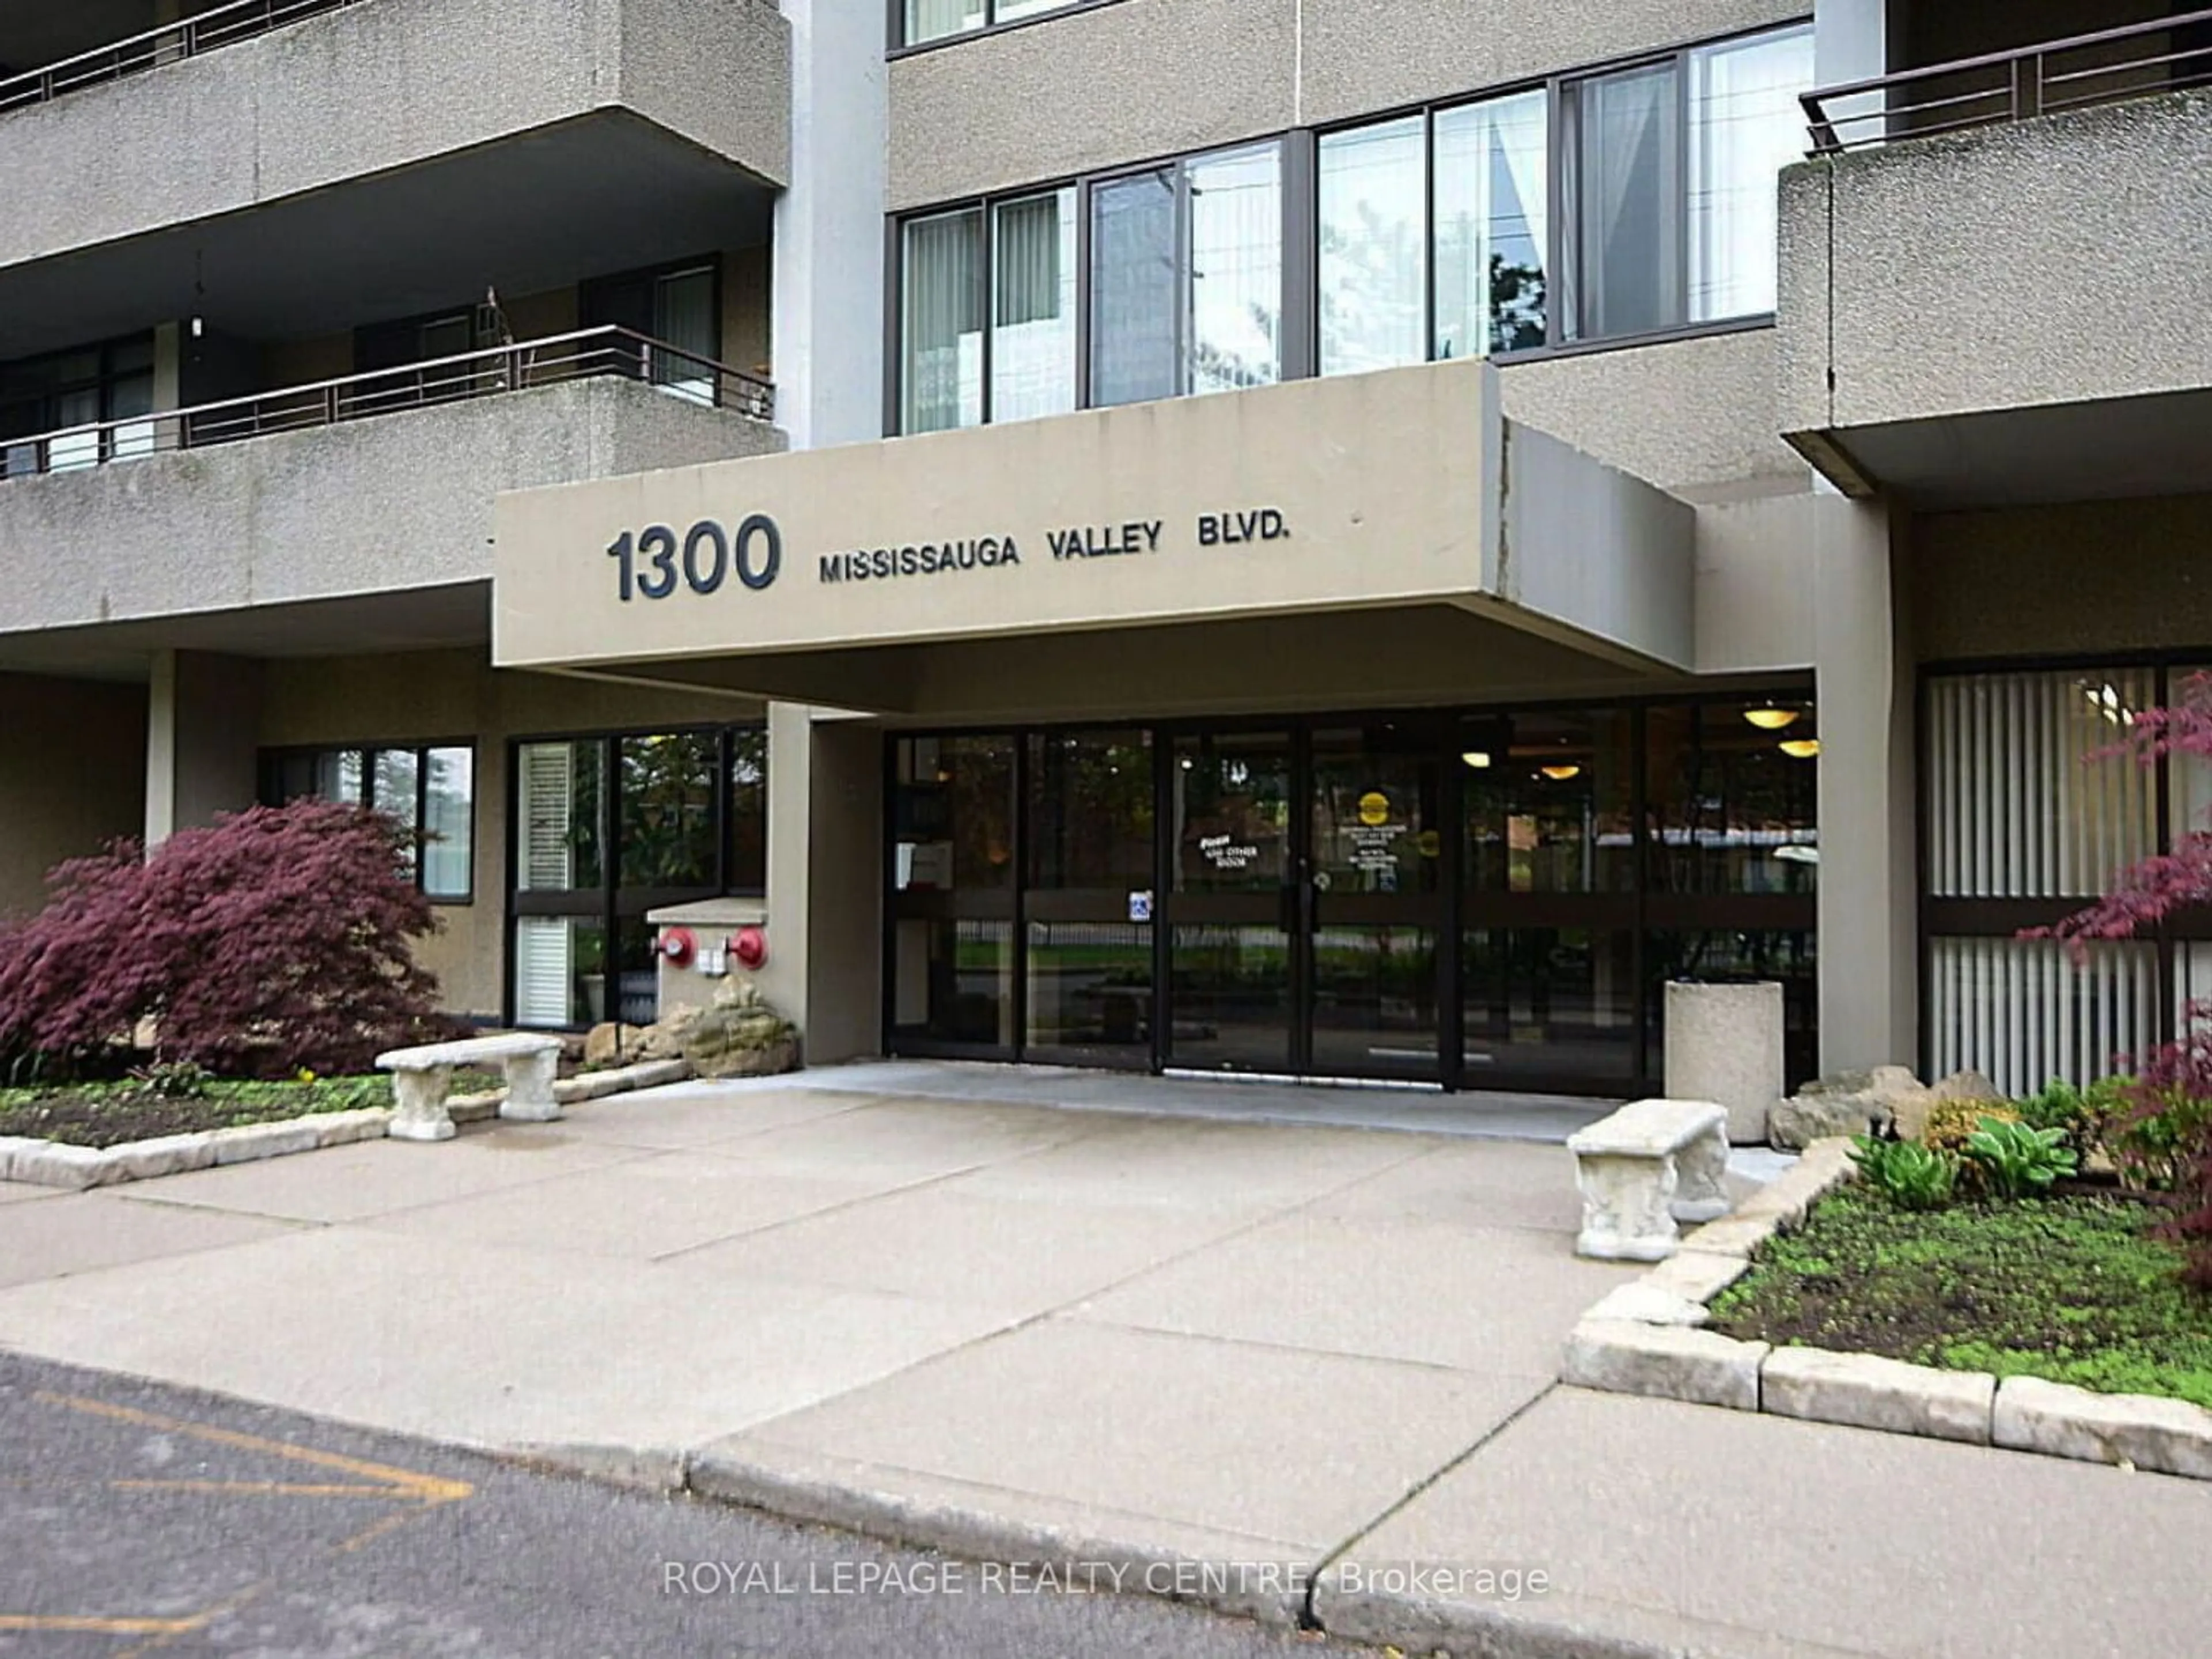 Indoor lobby for 1300 Mississauga Valley Blvd #309, Mississauga Ontario L5A 3S8